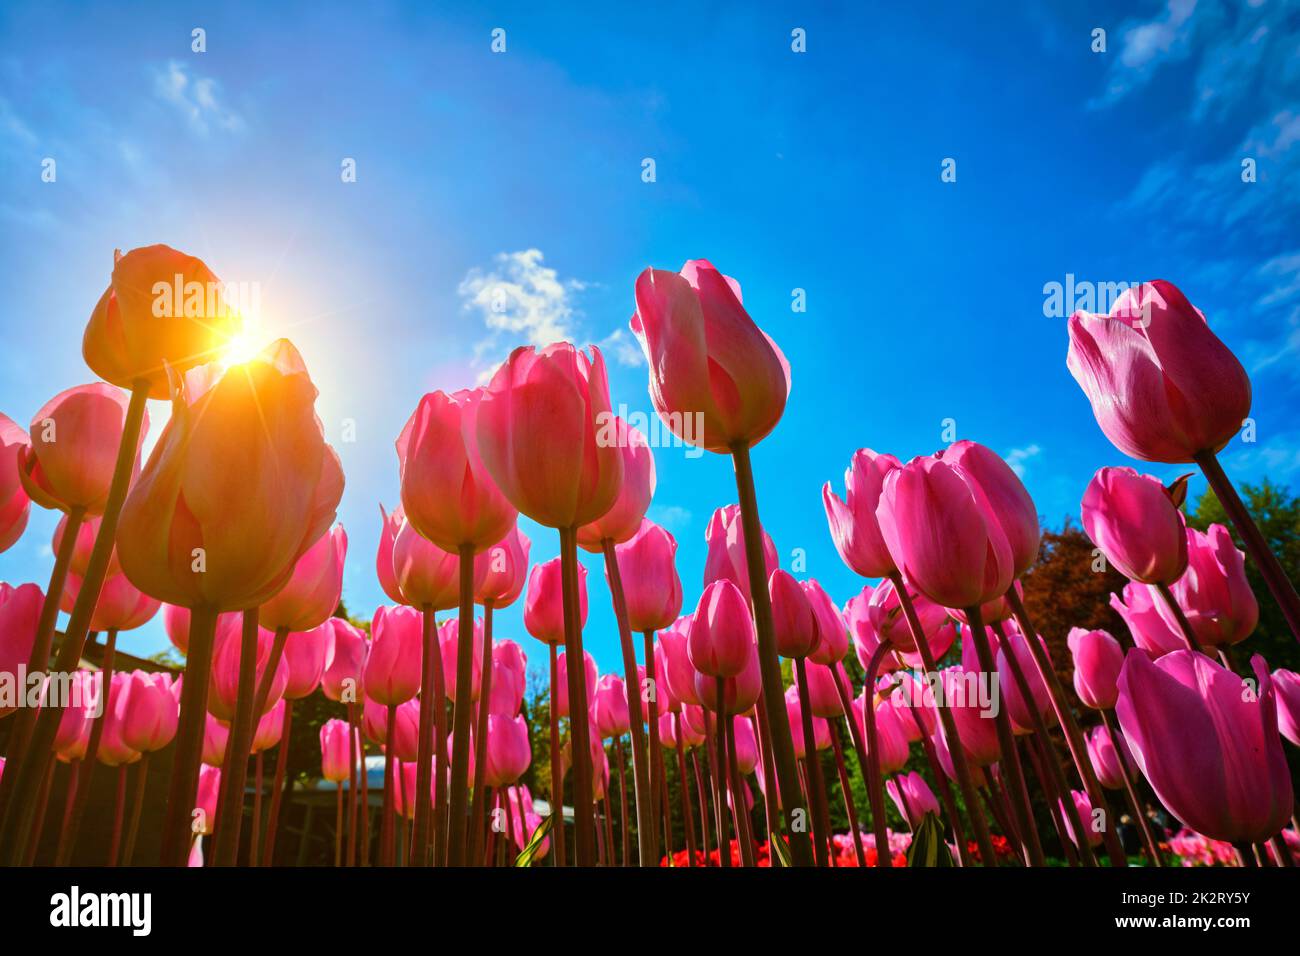 Blooming tulips against blue sky low vantage point Stock Photo